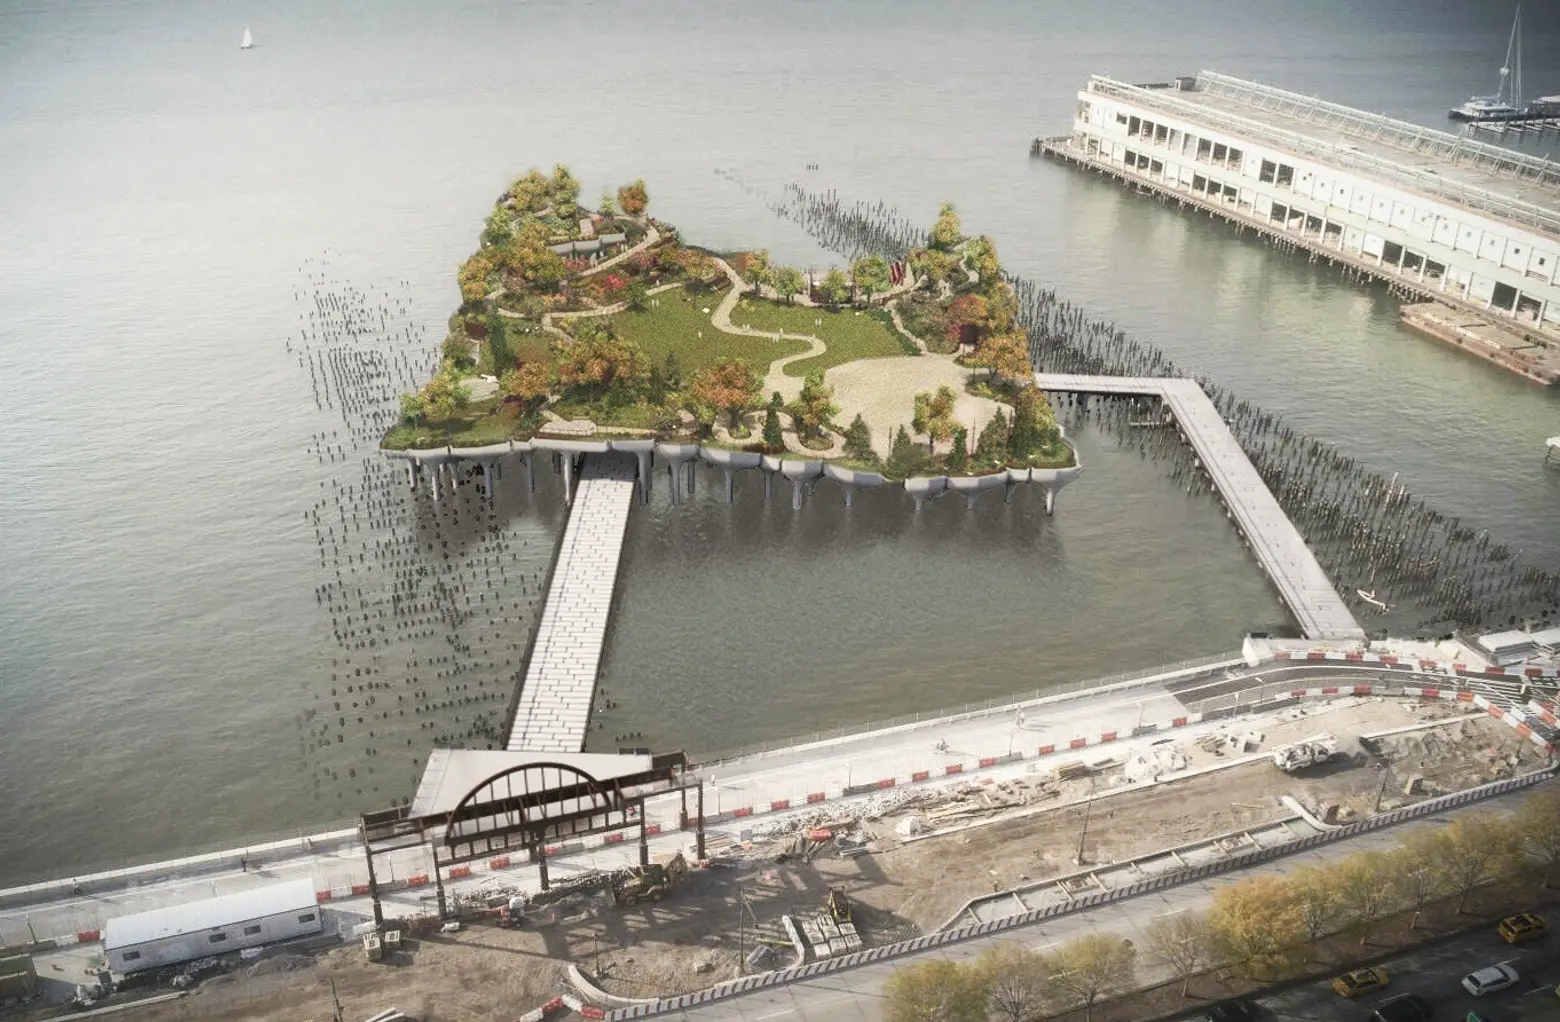 Pier 55 project files appeal to stop work order; Durst says he backed opposition